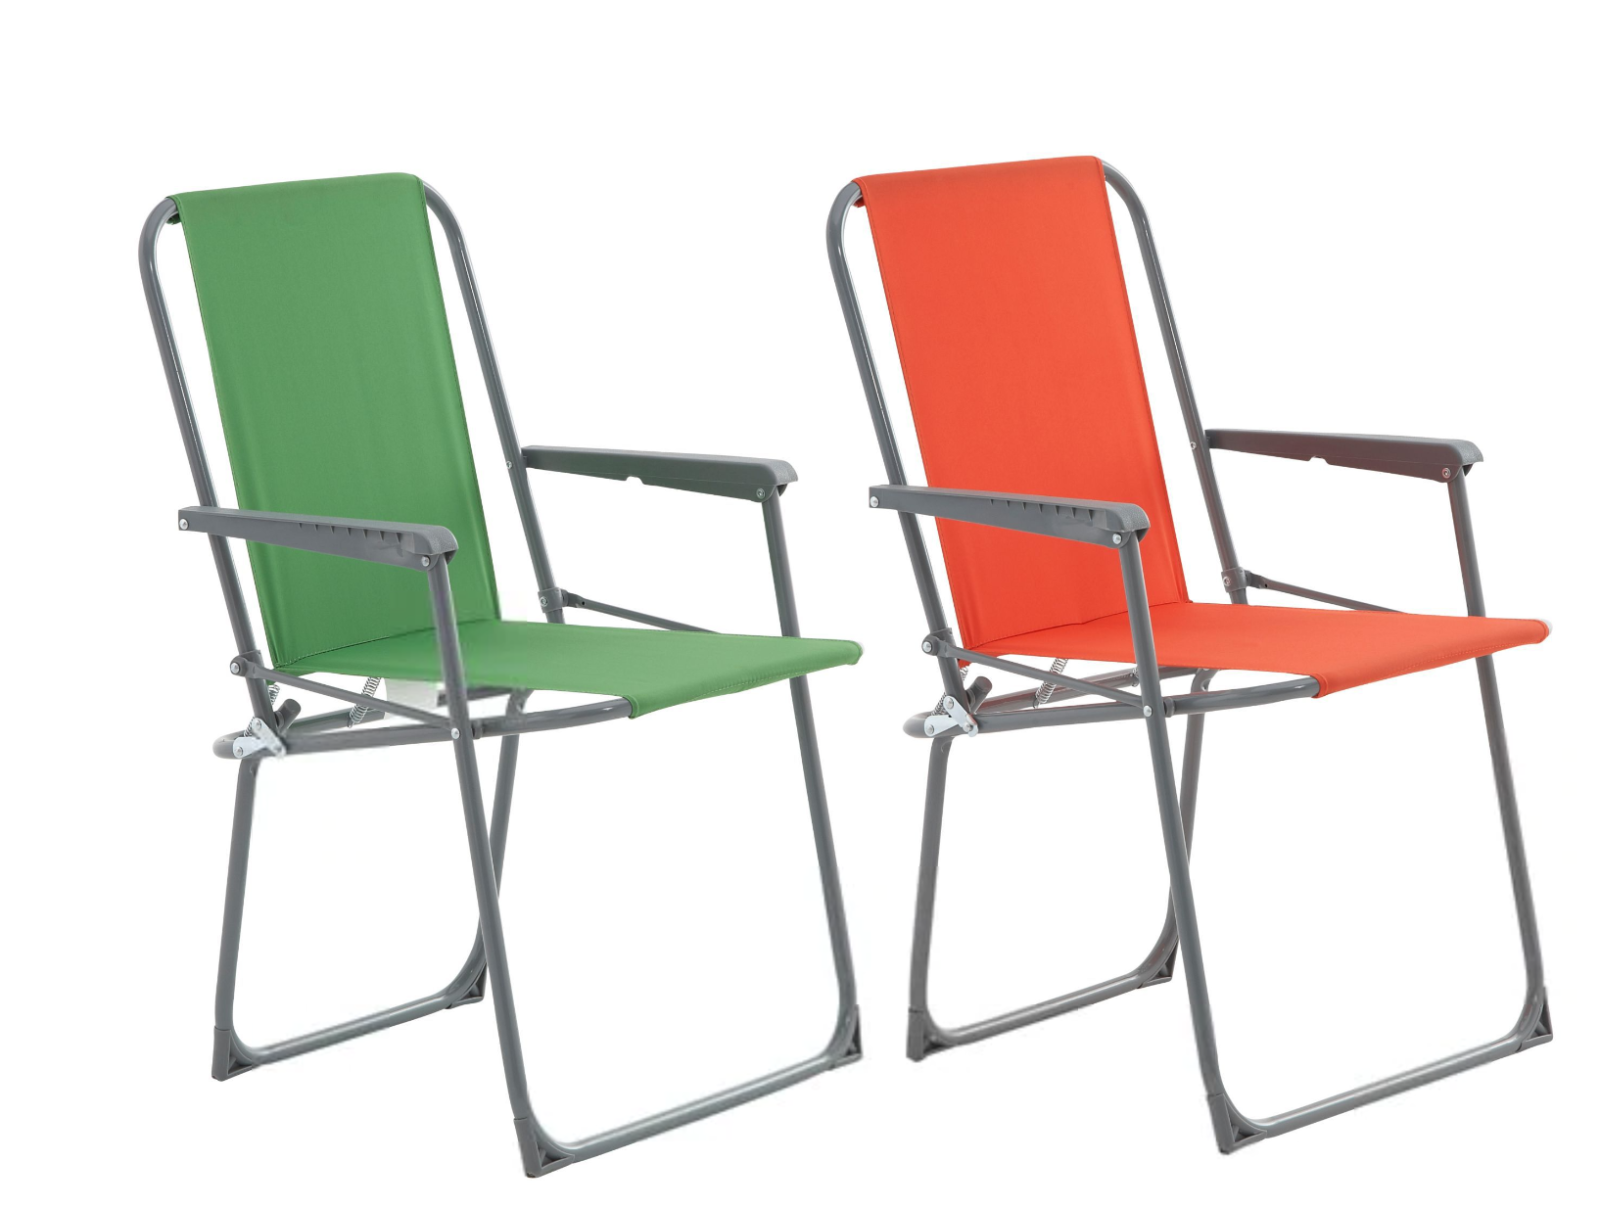 Pack Of 4 Blooma CURACAO MULTICOLOUR METAL PICNIC CHAIR 2 Orange &amp; 2 Green 4736